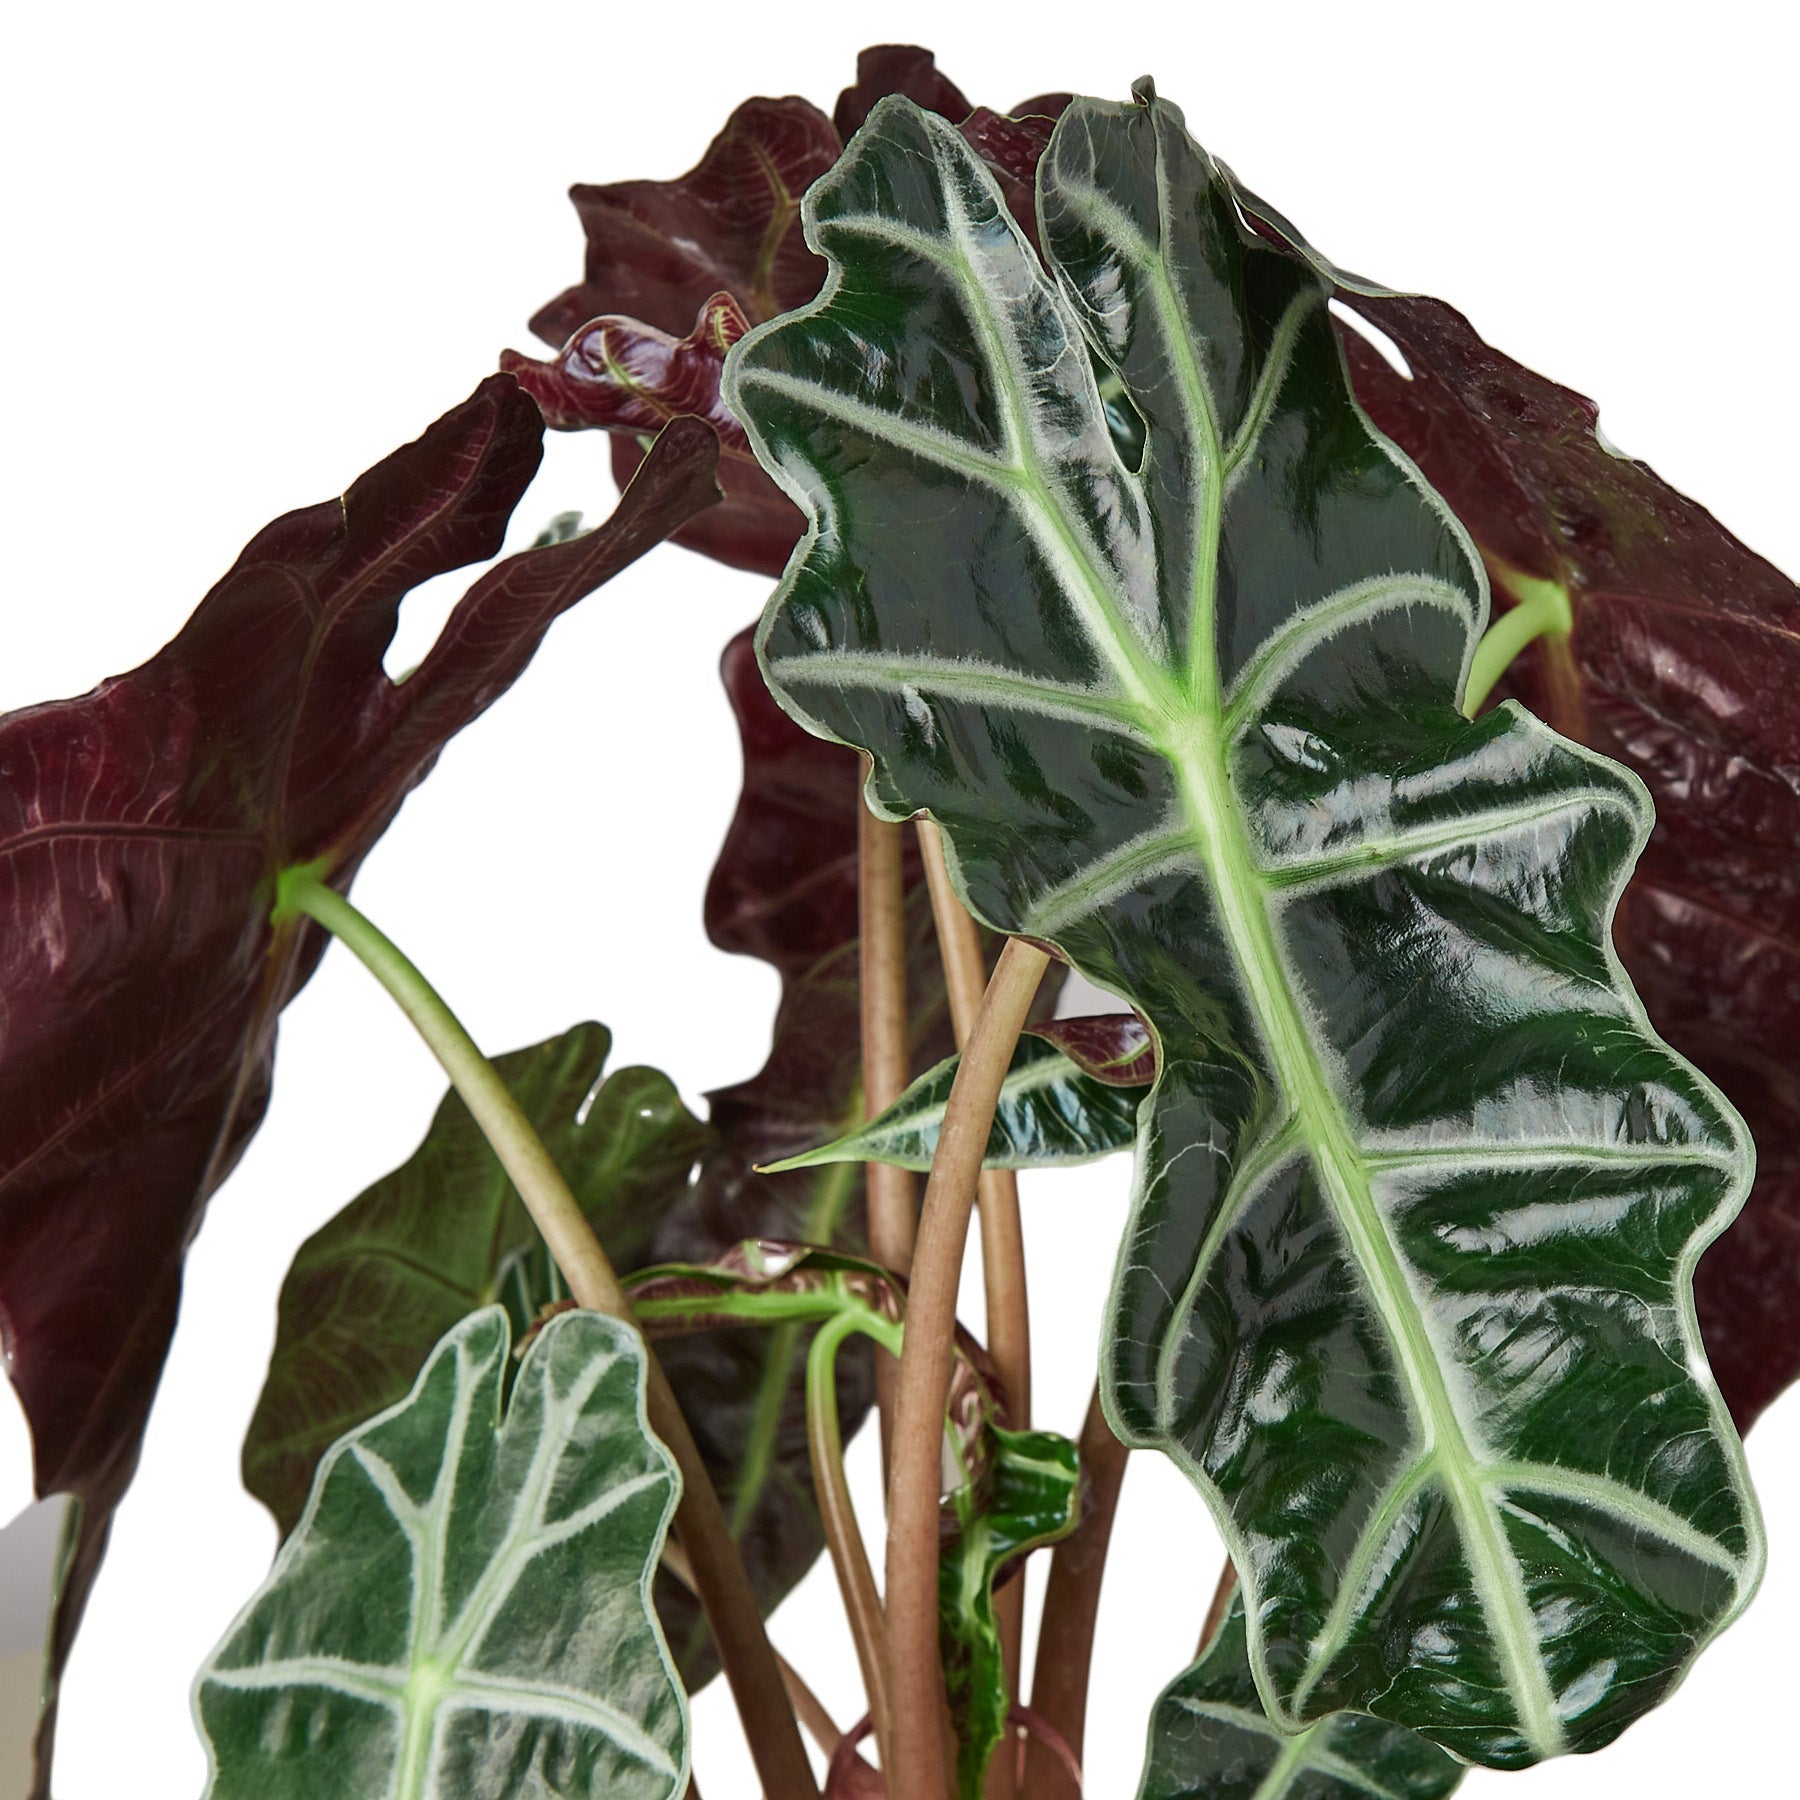 Alocasia Polly 'African Mask' - 6" Pot - NURSERY POT ONLY - One Beleaf Away Plant Studio